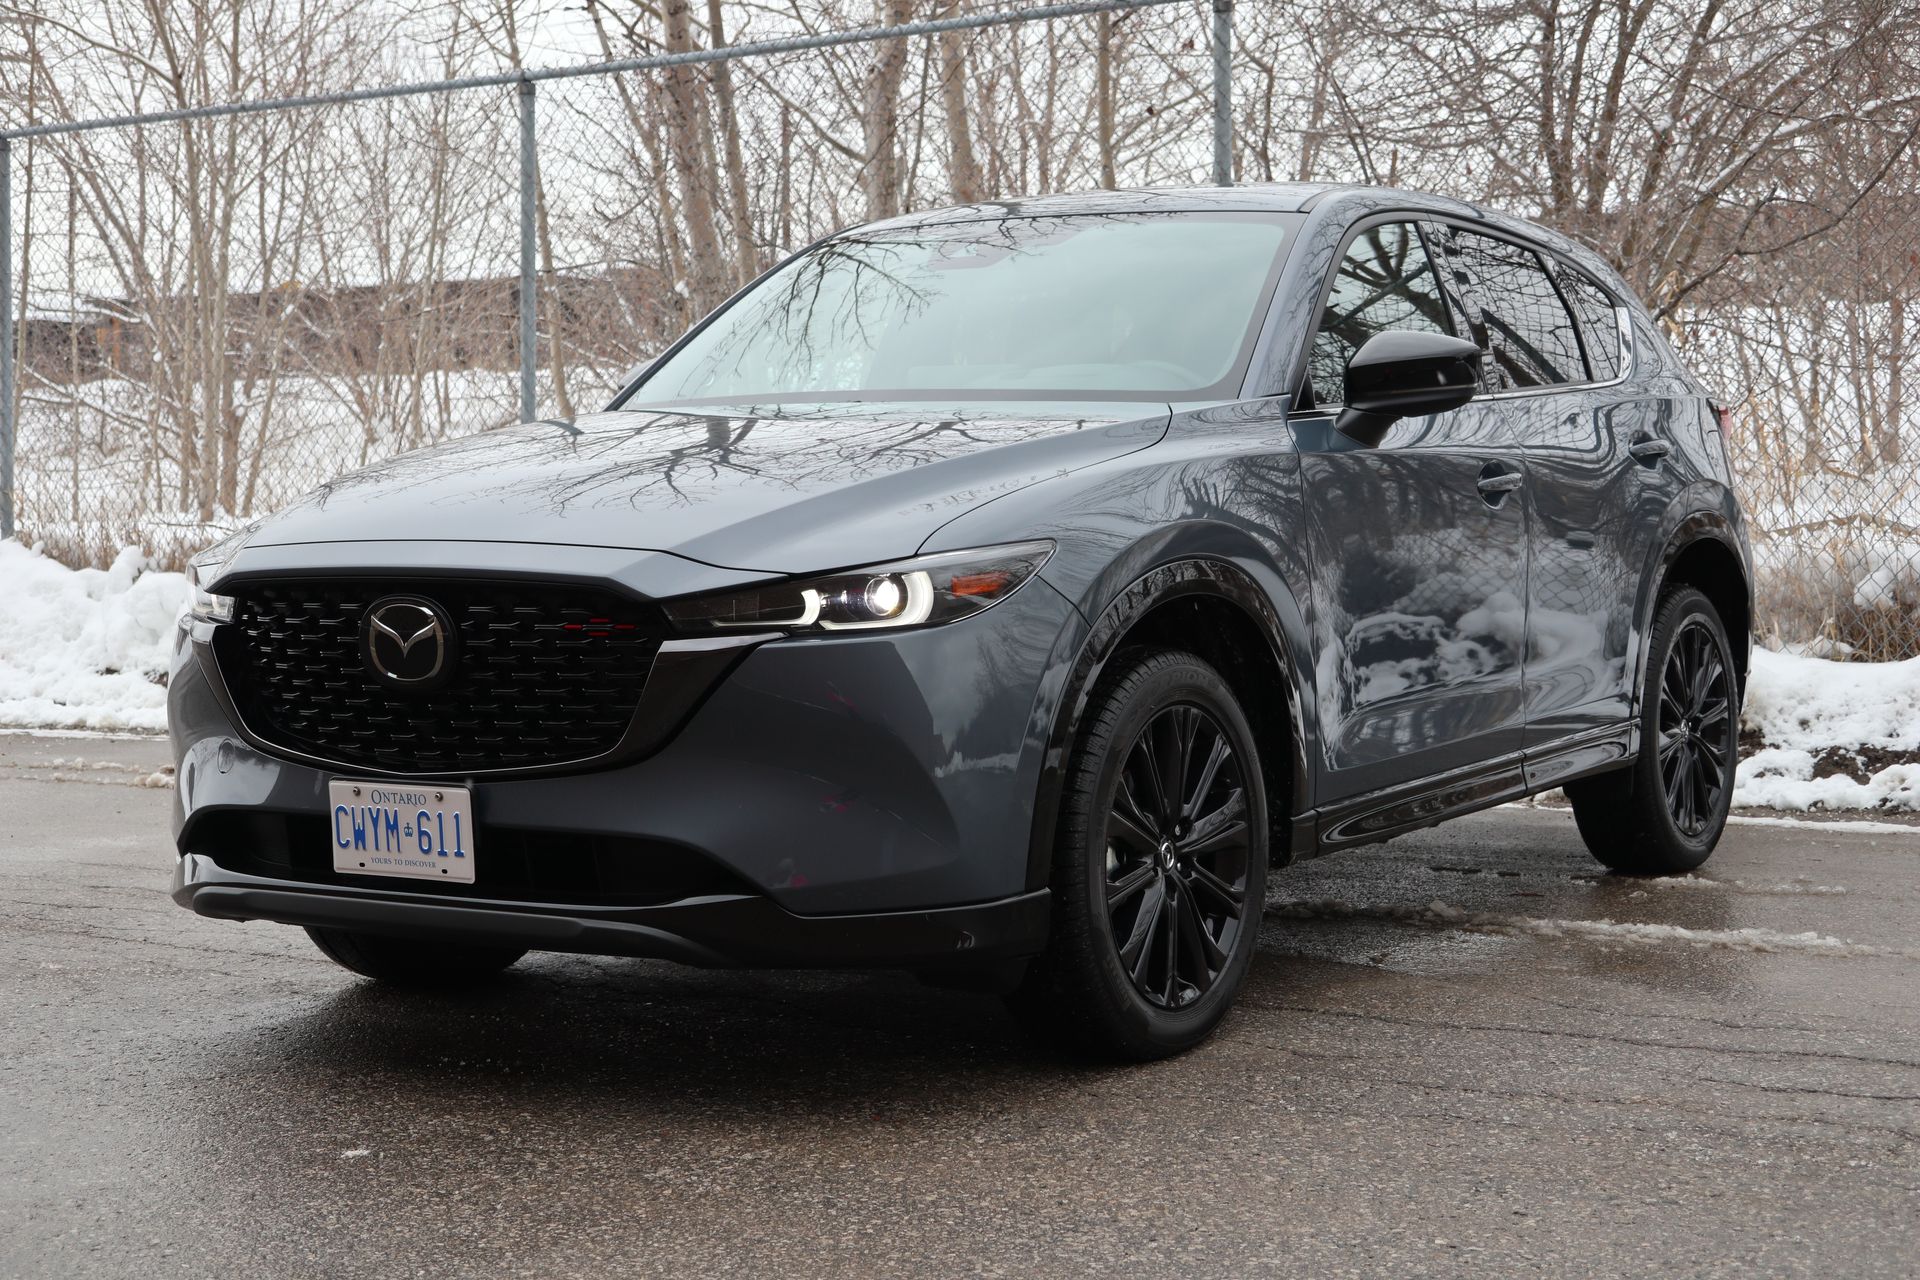 2016 Mazda CX-5 Research, Photos, Specs and Expertise